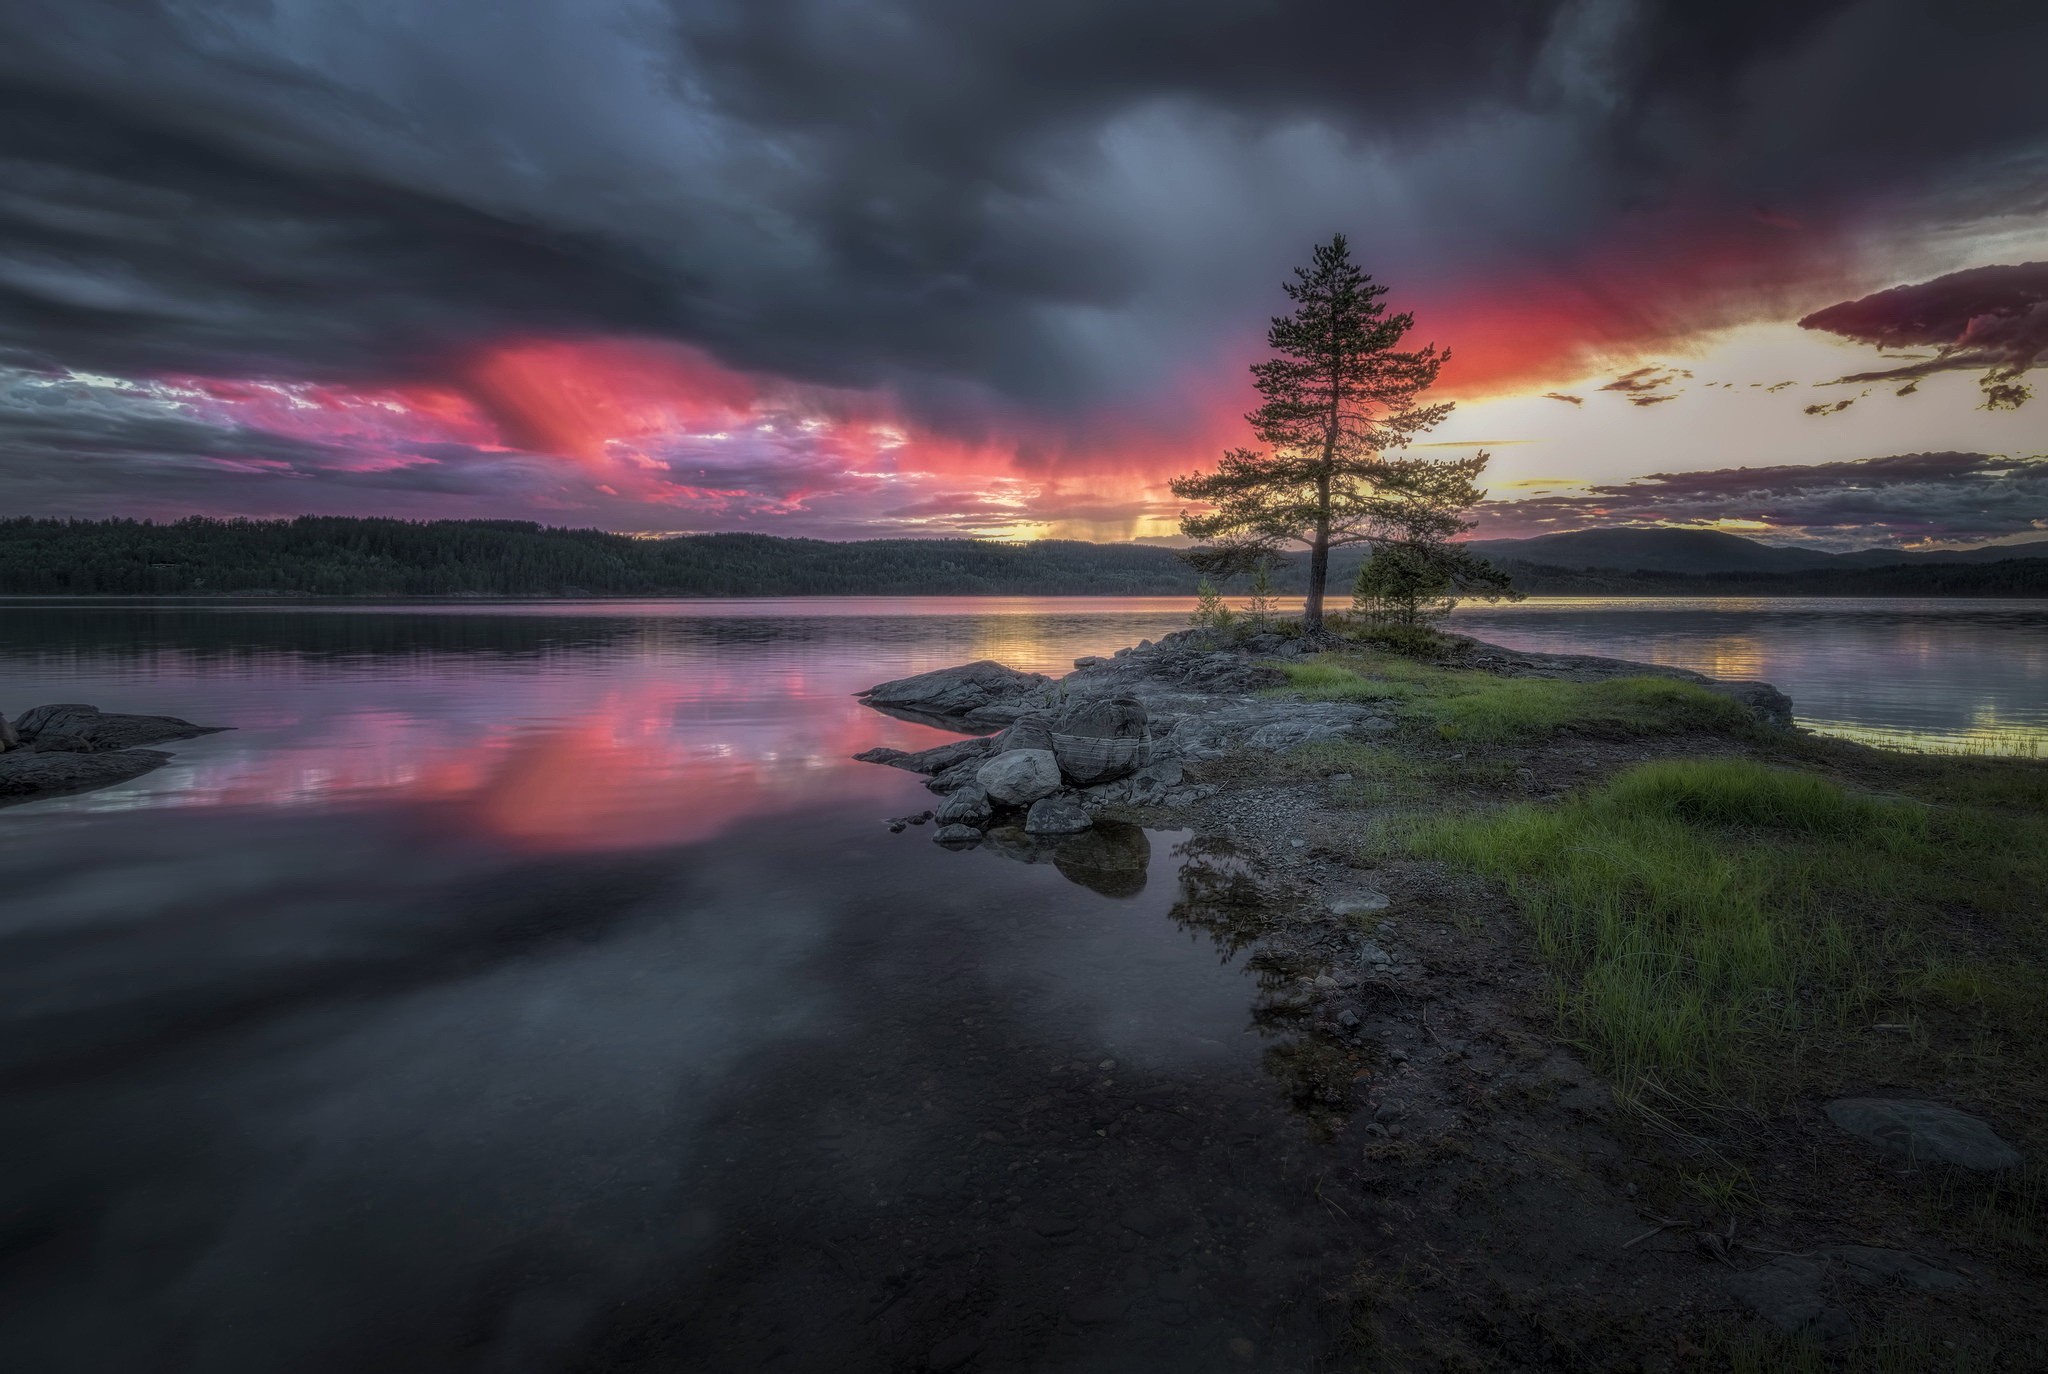 General 2048x1374 lake clouds nature sky landscape trees grass low light water